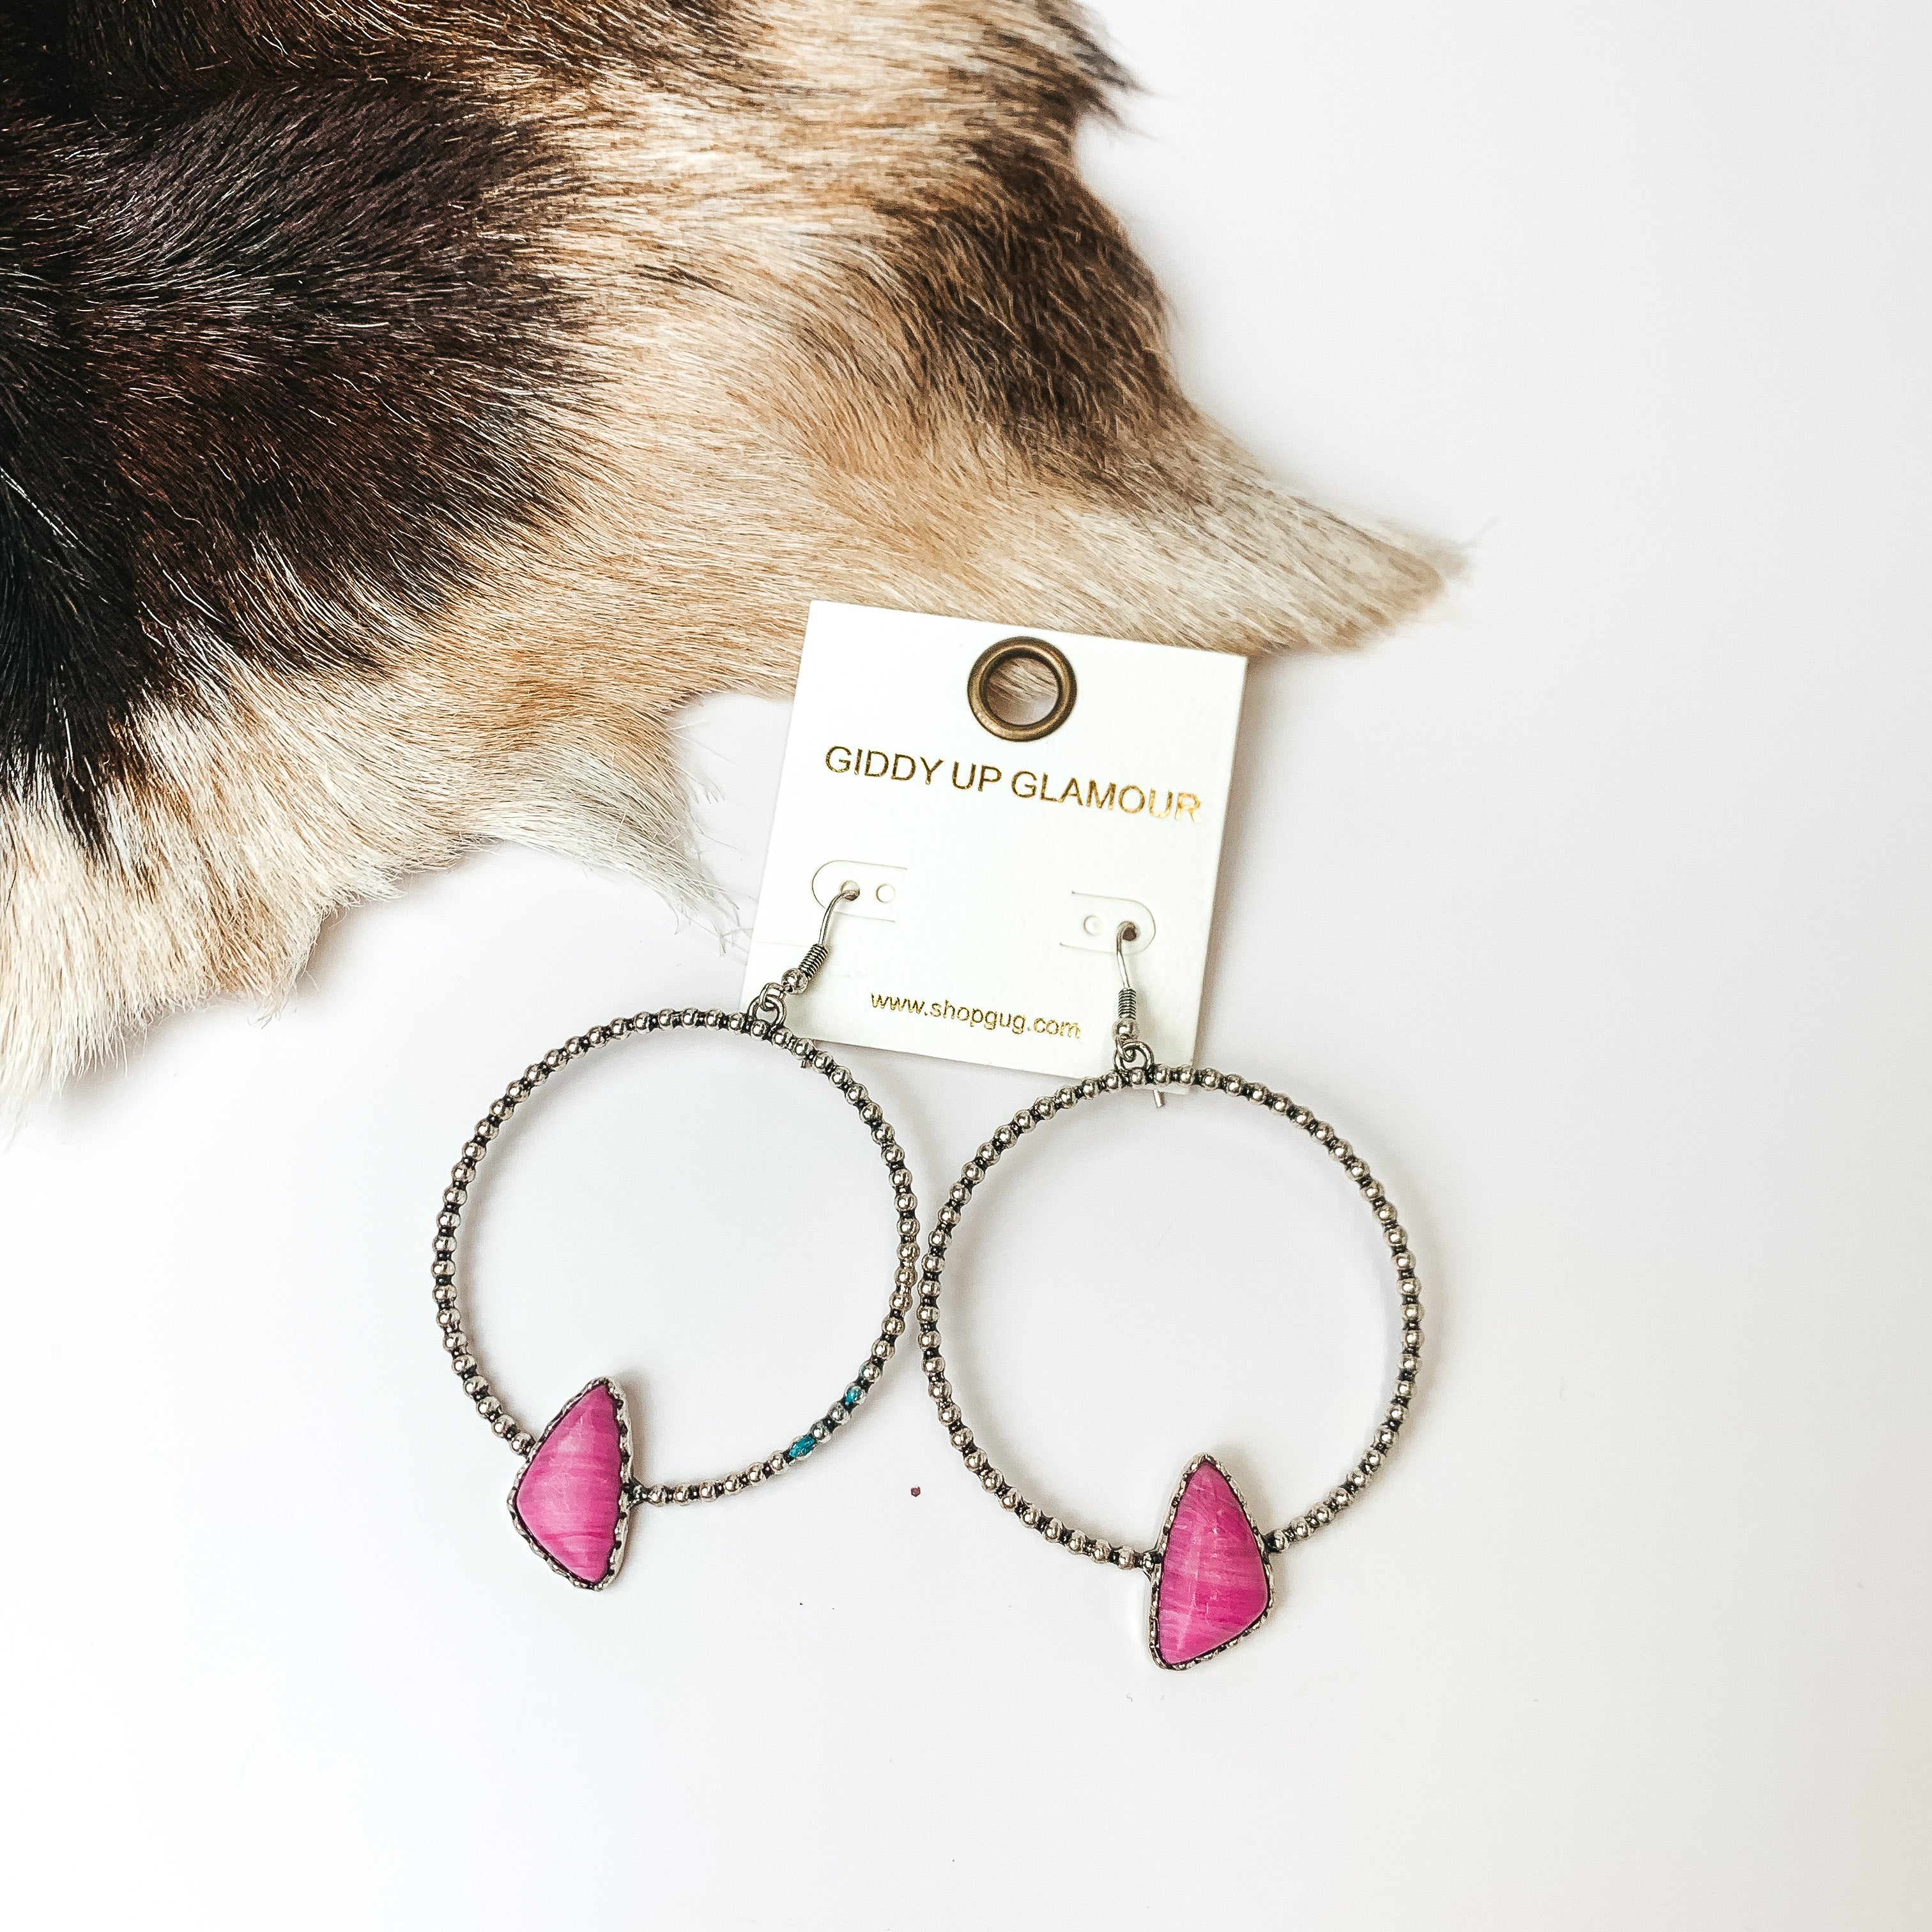 Silver Tone Textured Hoop Earring with Pink Stone. Pictured on a white background with faux animal fur in the top left.